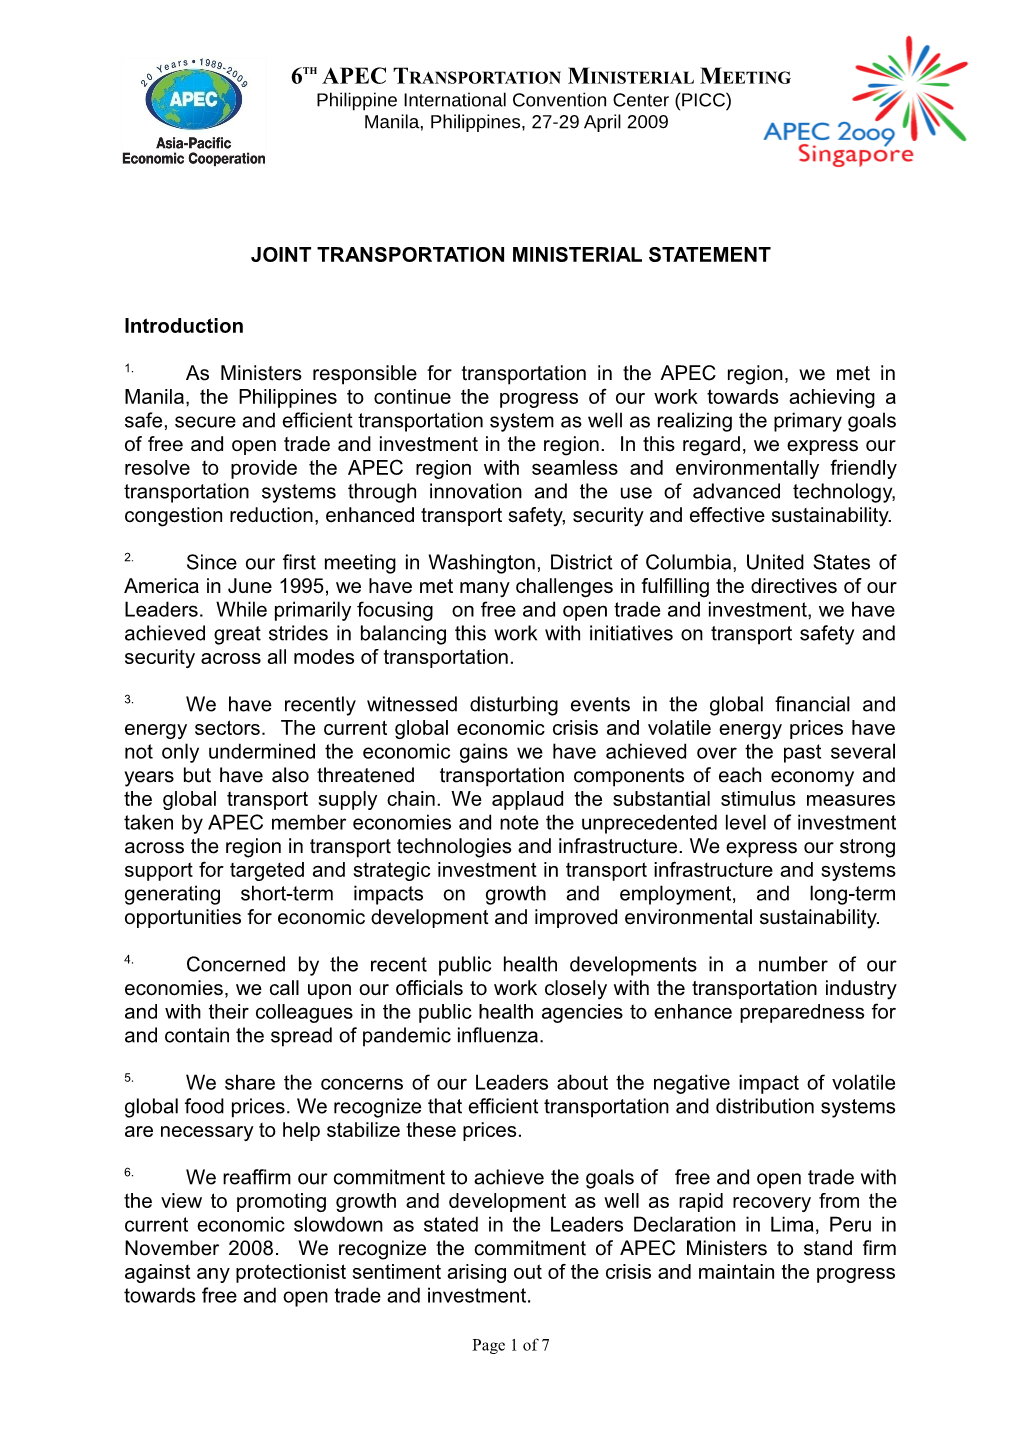 Draft Joint Transportation Ministerial Statement